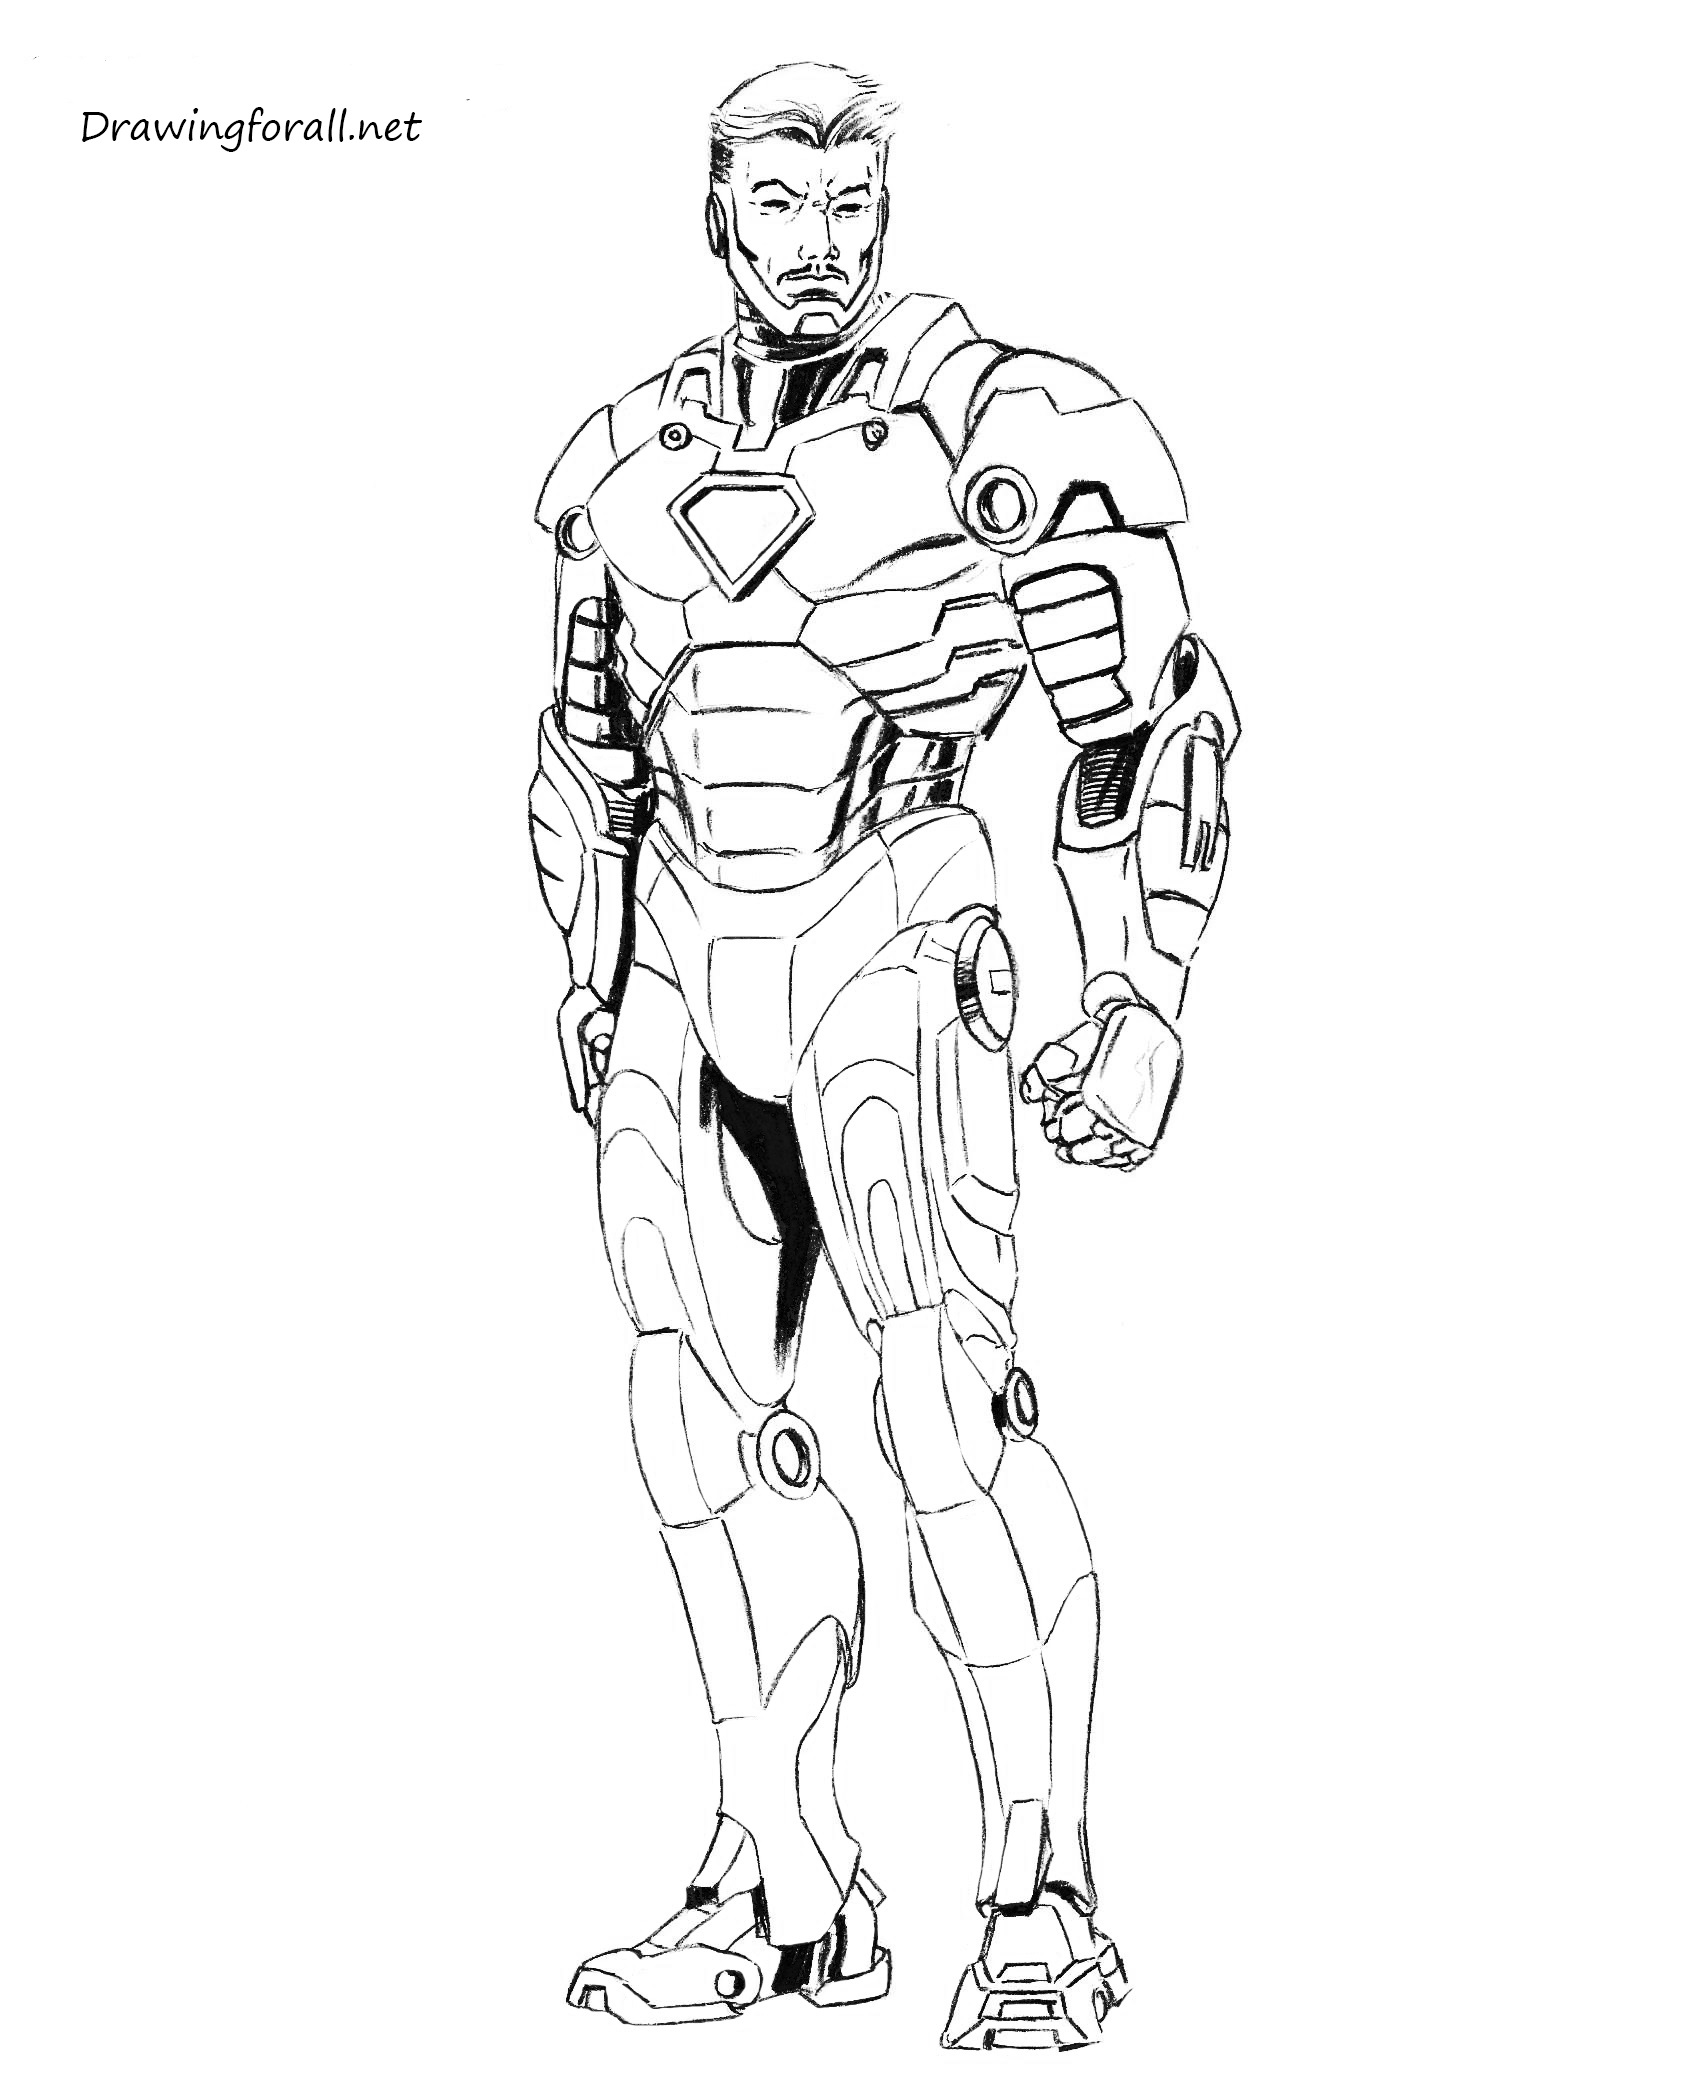 Learn How to Draw Iron Man from Avengers Endgame (Avengers: Endgame) Step  by Step : Drawing Tutorials